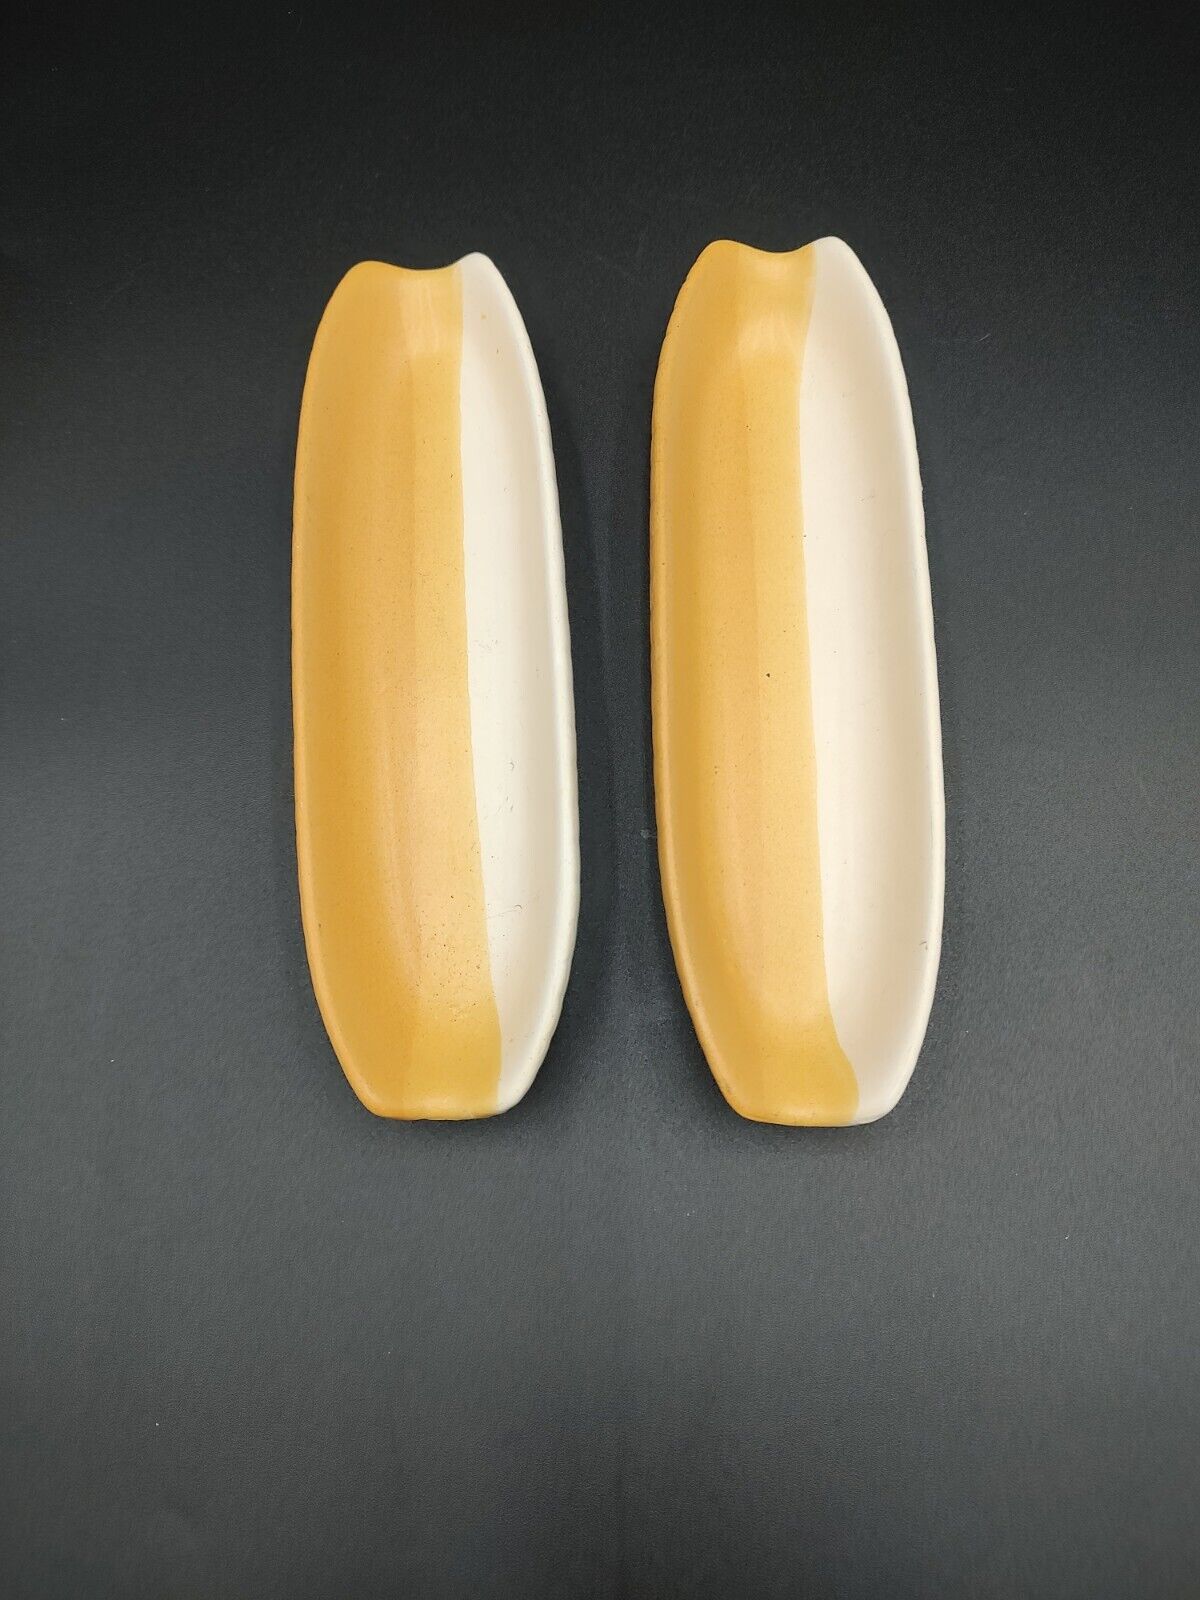 Vintage Ceramic Corn on the Cob Dishes Yellow Cream Set of 2 Made in Taiwan